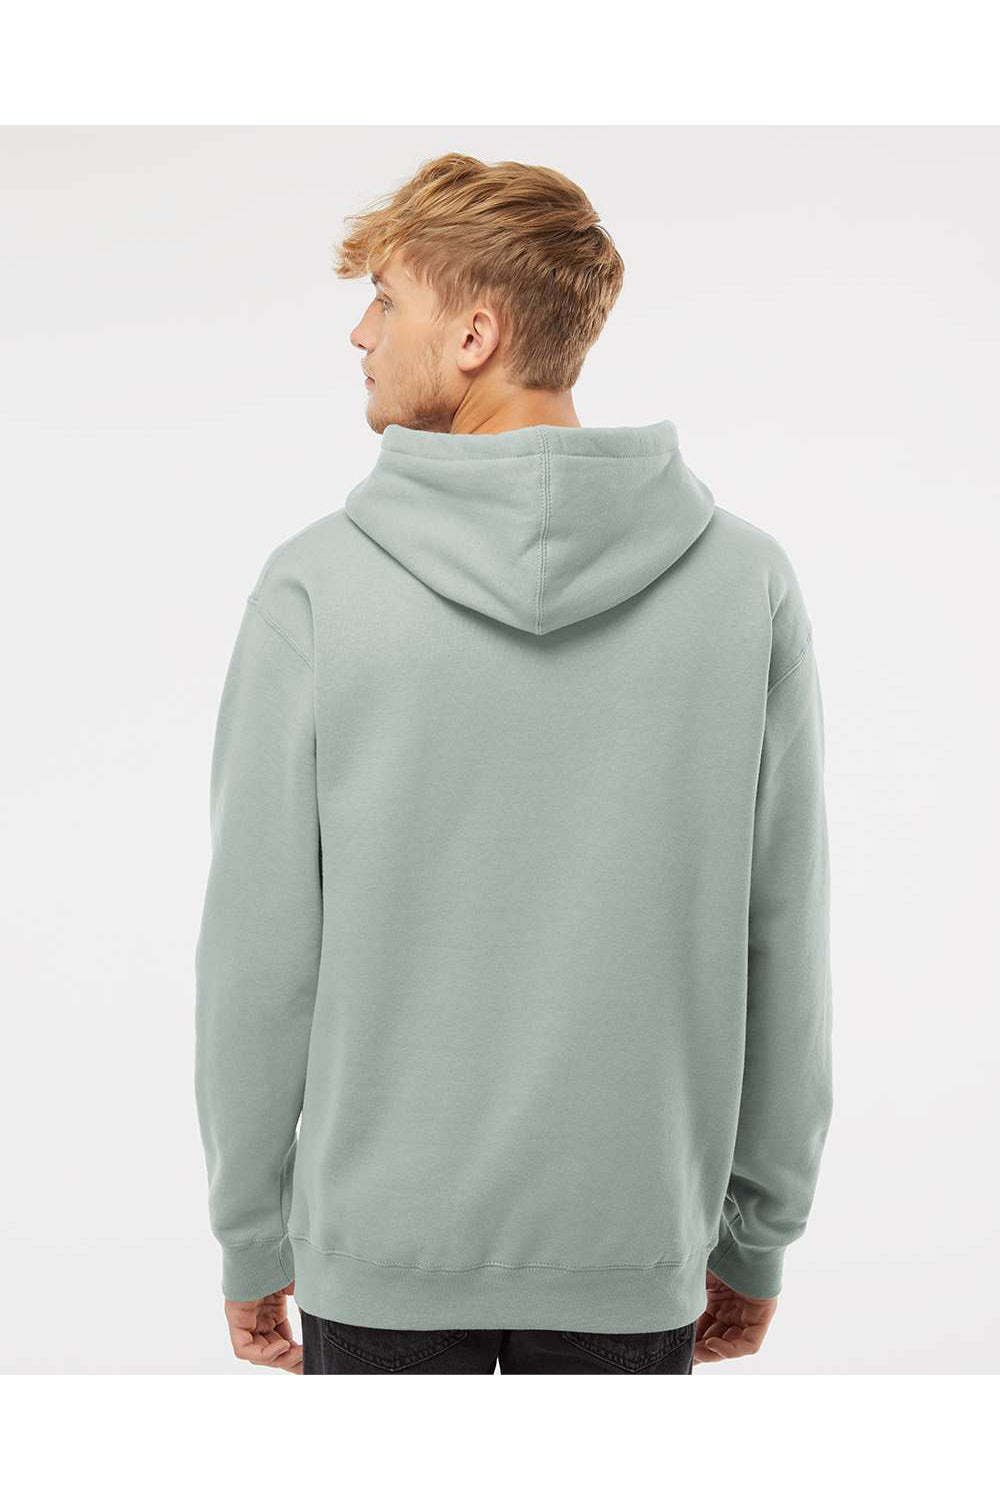 Independent Trading Co. IND4000 Mens Hooded Sweatshirt Hoodie Dusty Sage Green Model Back